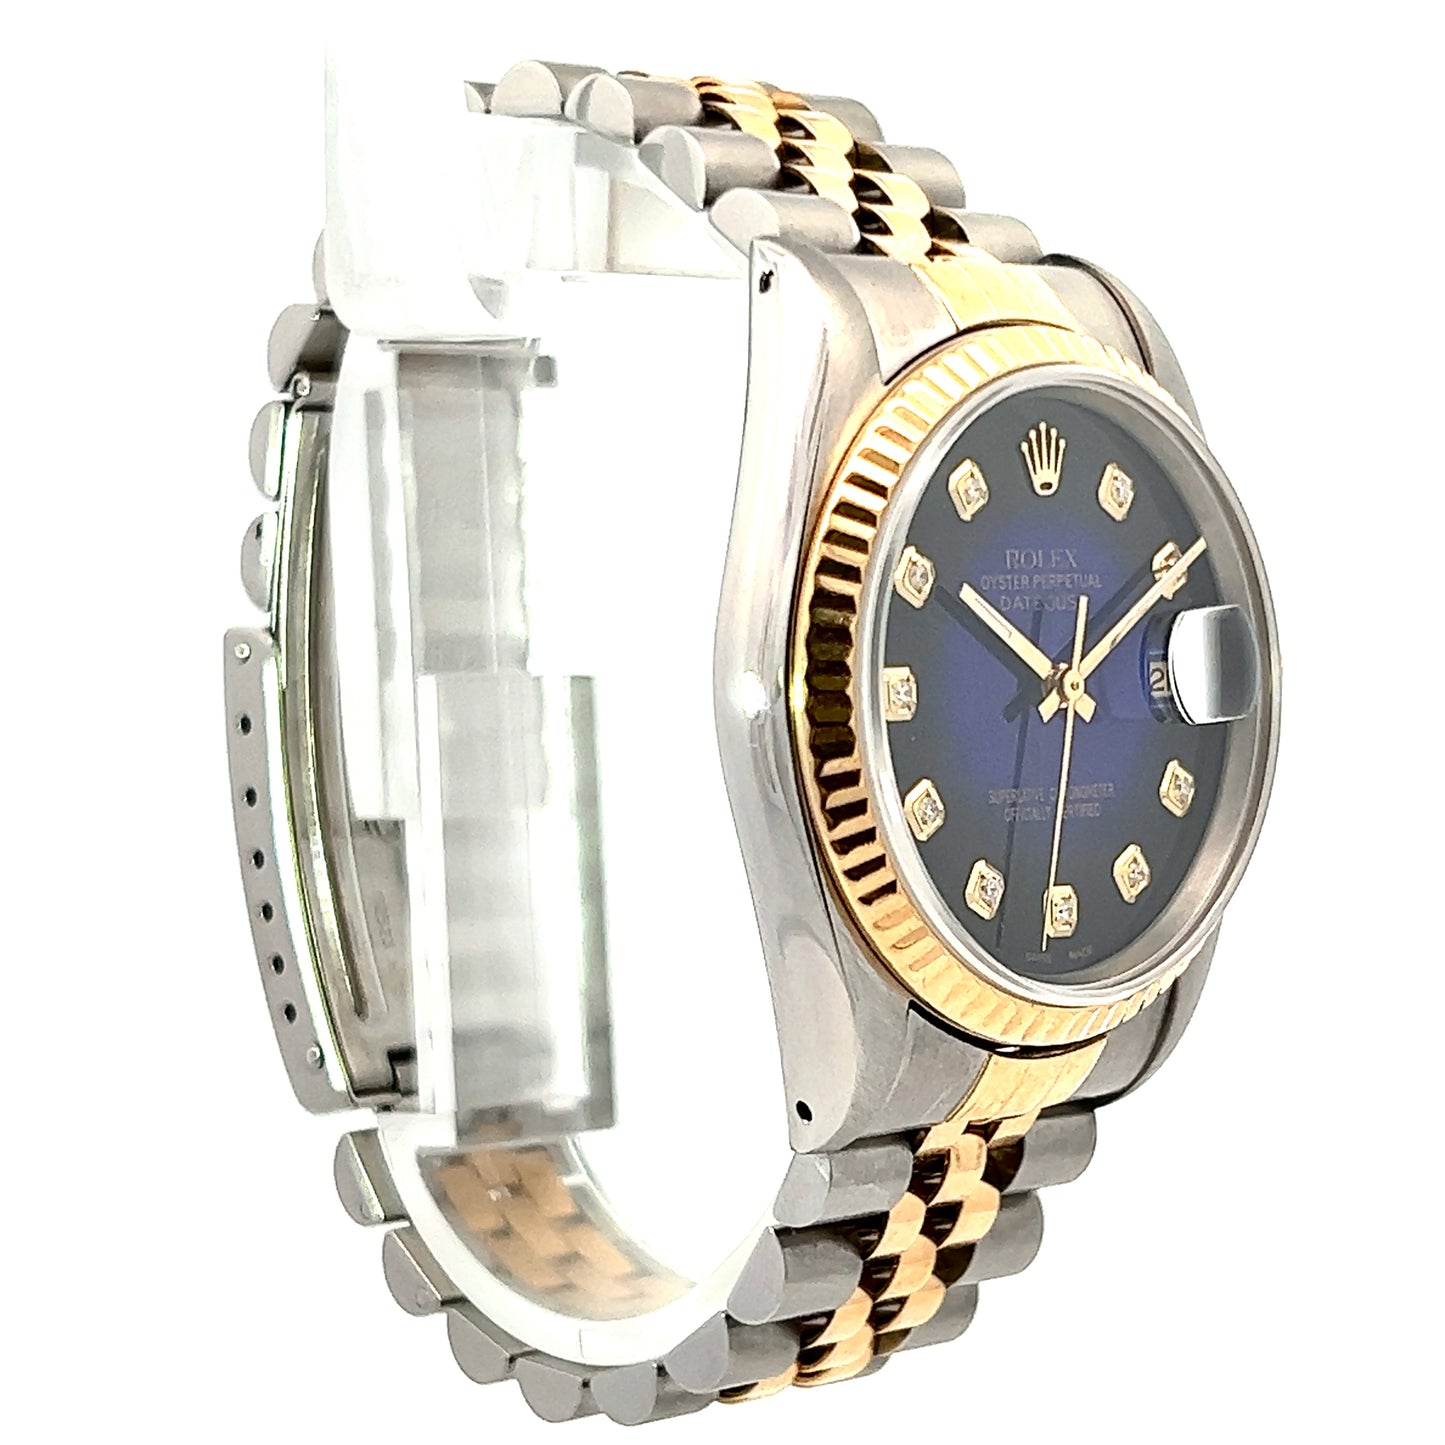 ROLEX Oyster Perpetual DATEJUST Automatic 36mm 2 Tone Diamond Watch